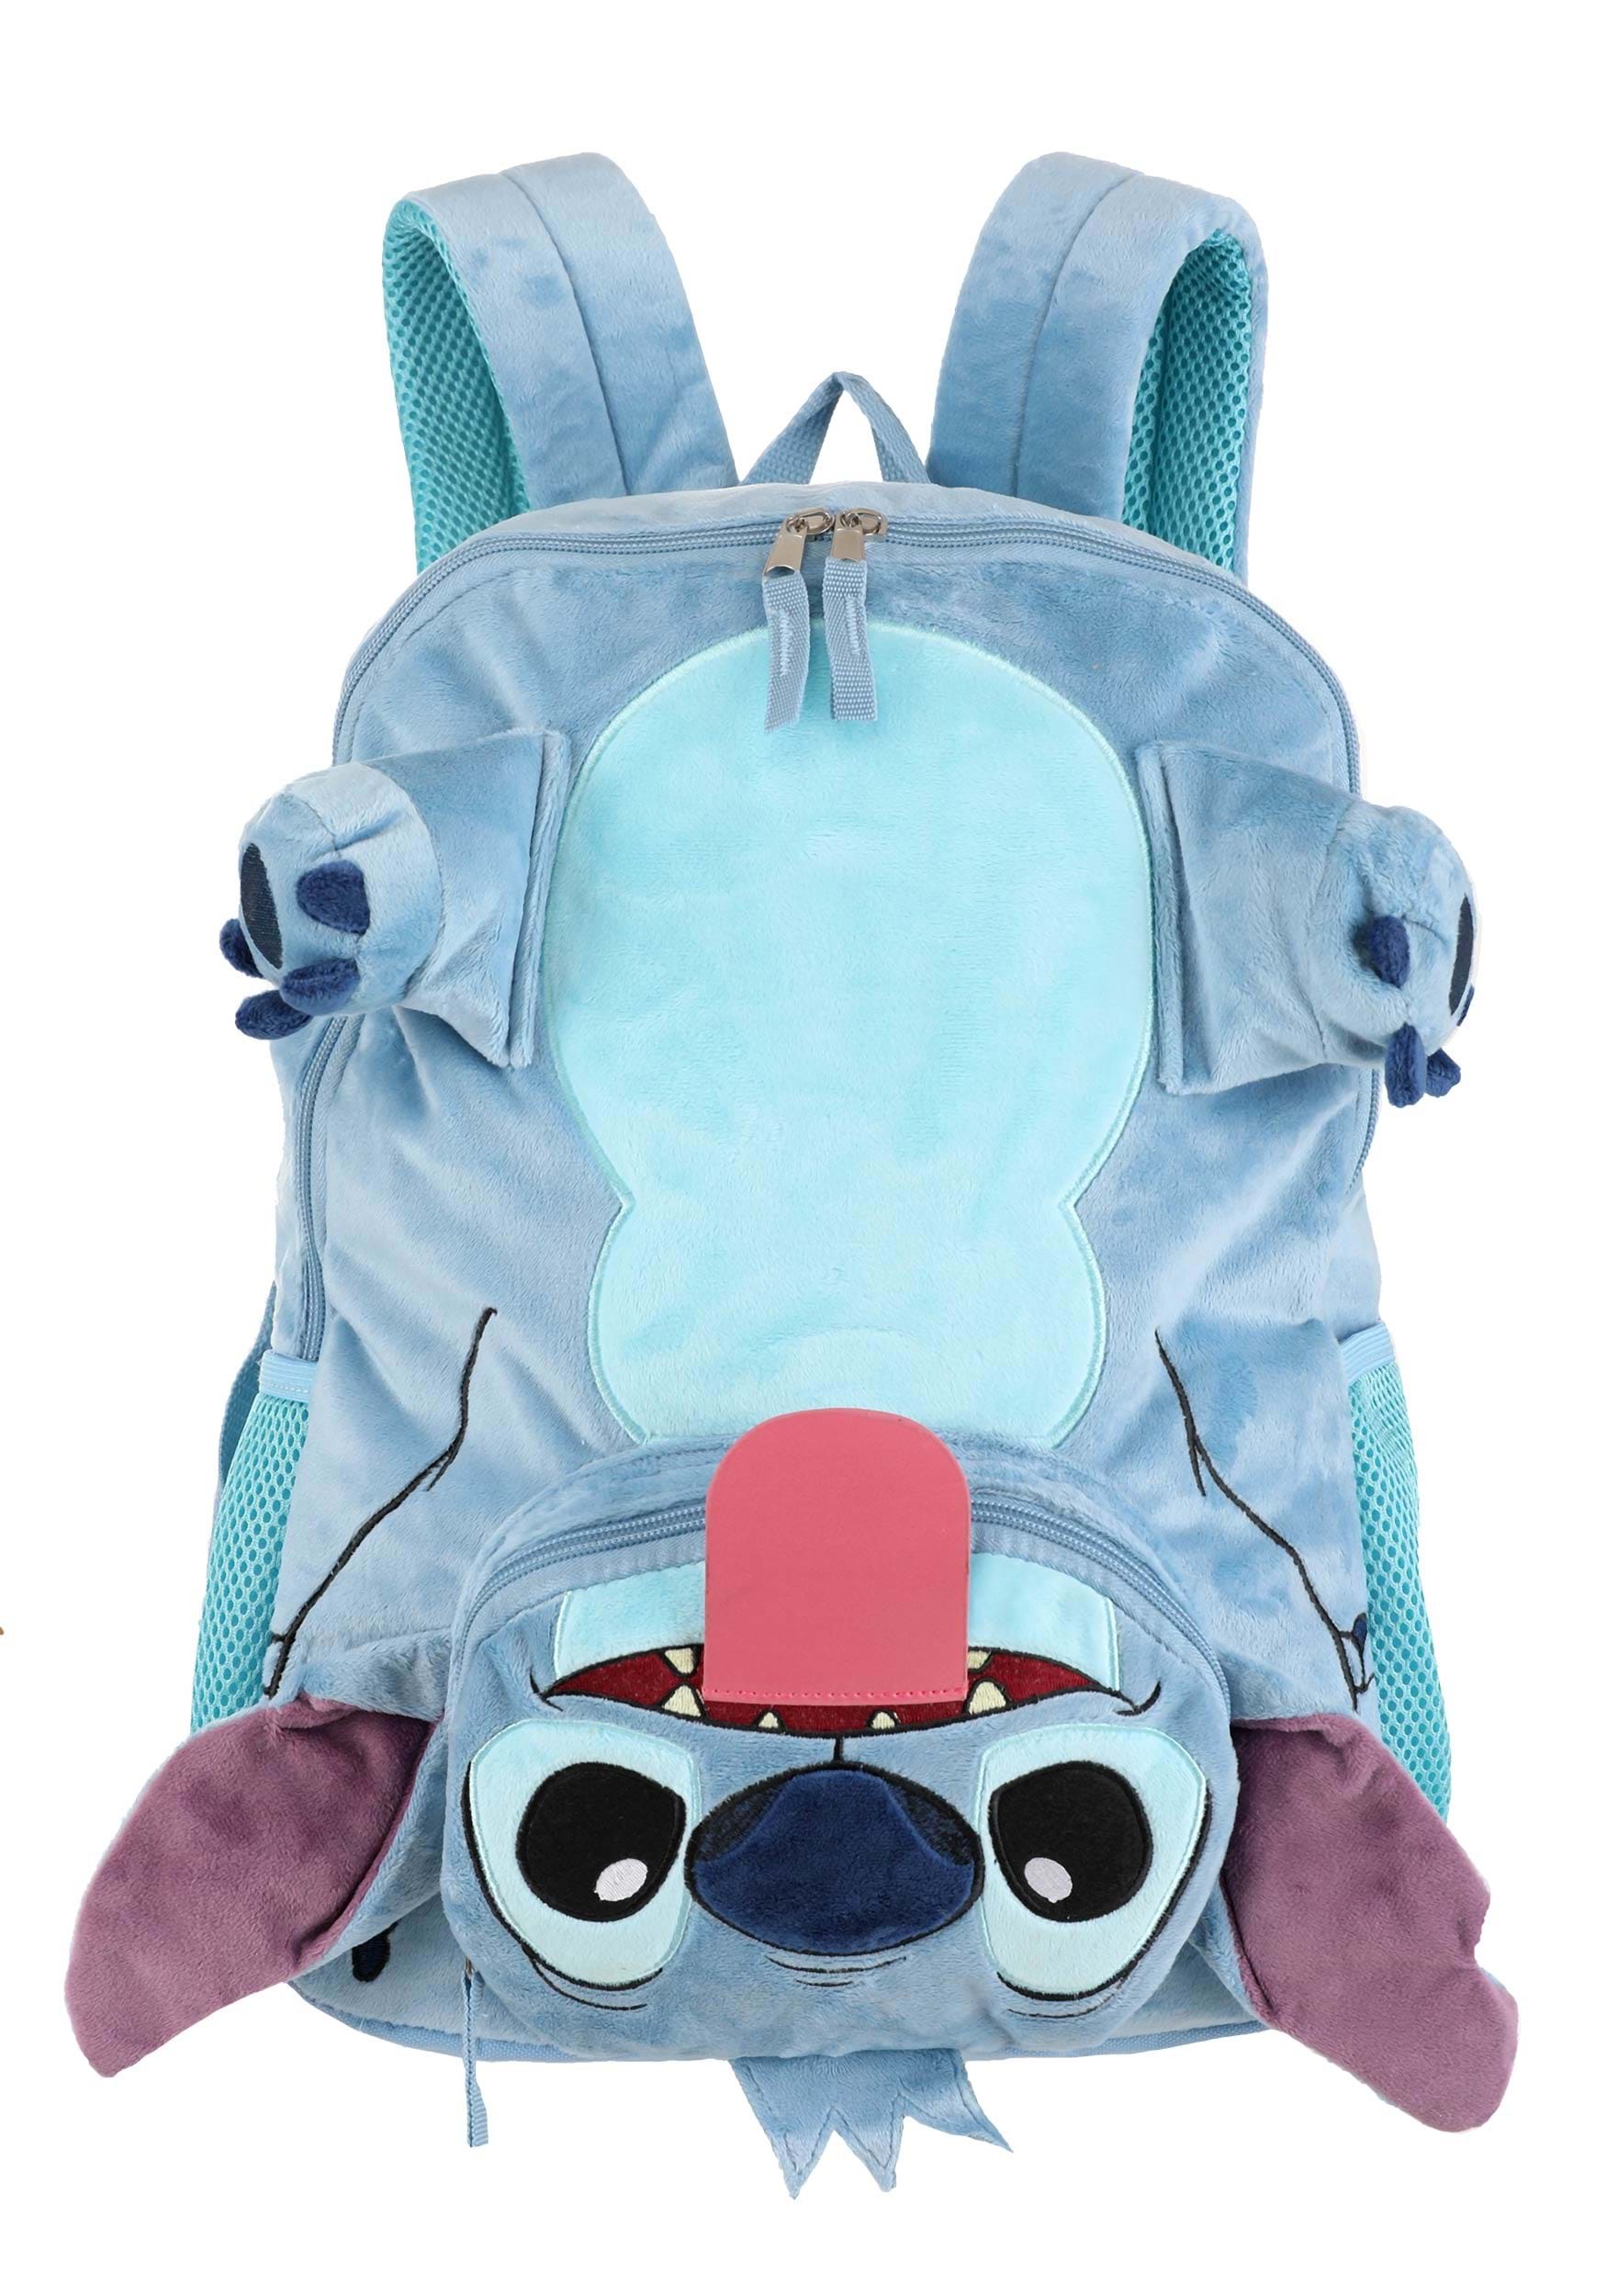 16" Stitch Handstand Plush Backpack